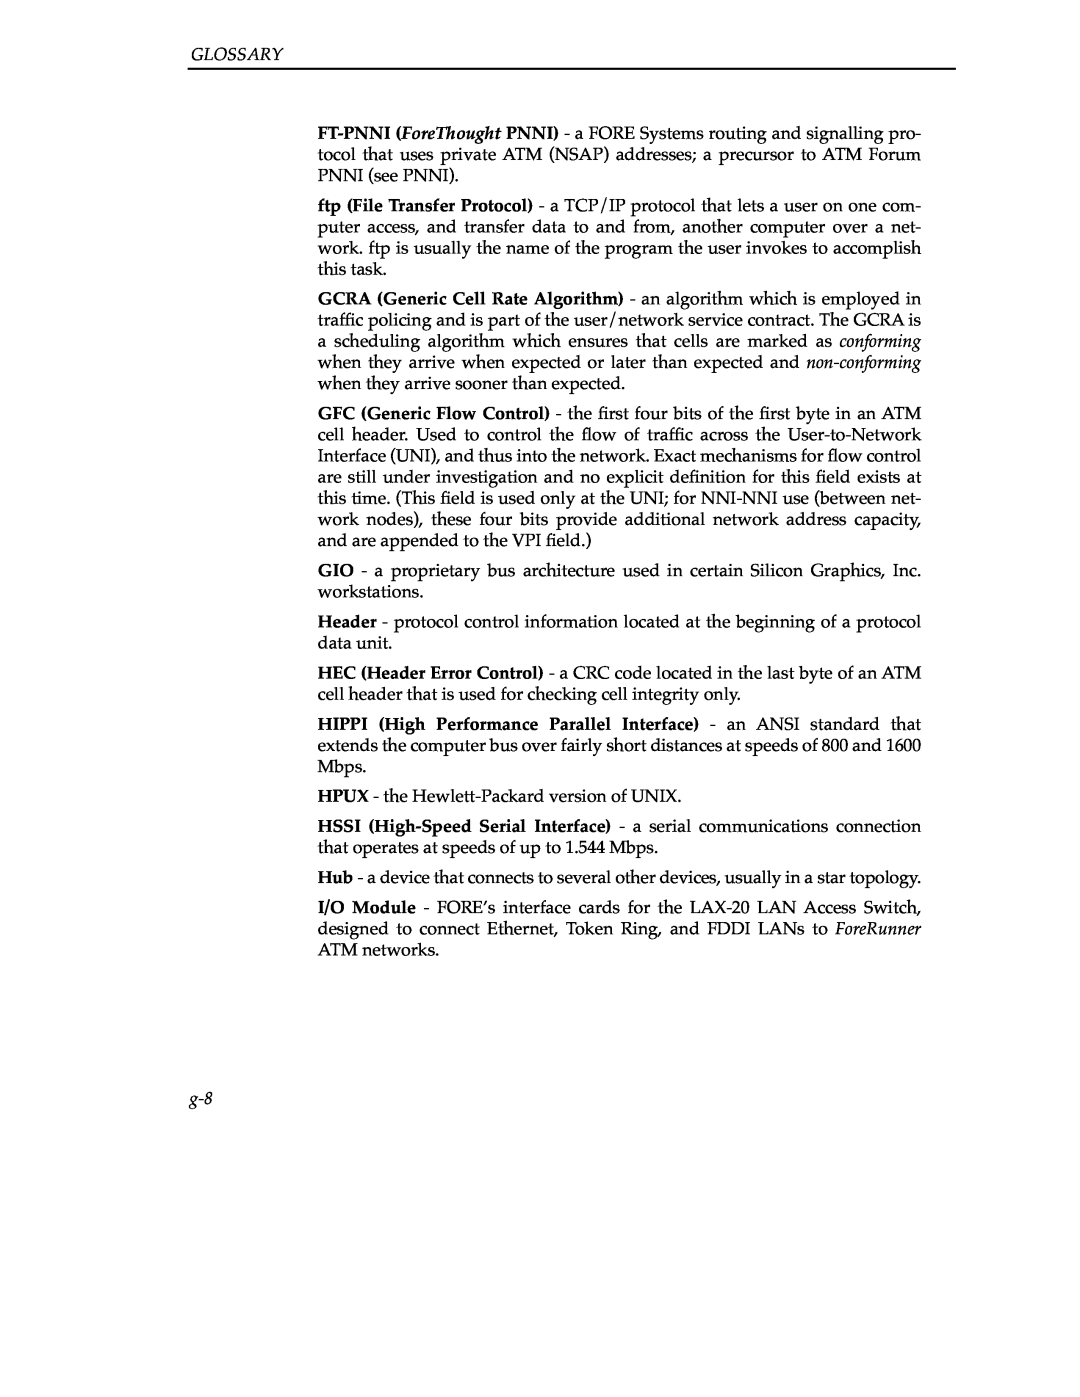 Cabletron Systems 9A000 manual Glossary, HPUX - the Hewlett-Packard version of UNIX 